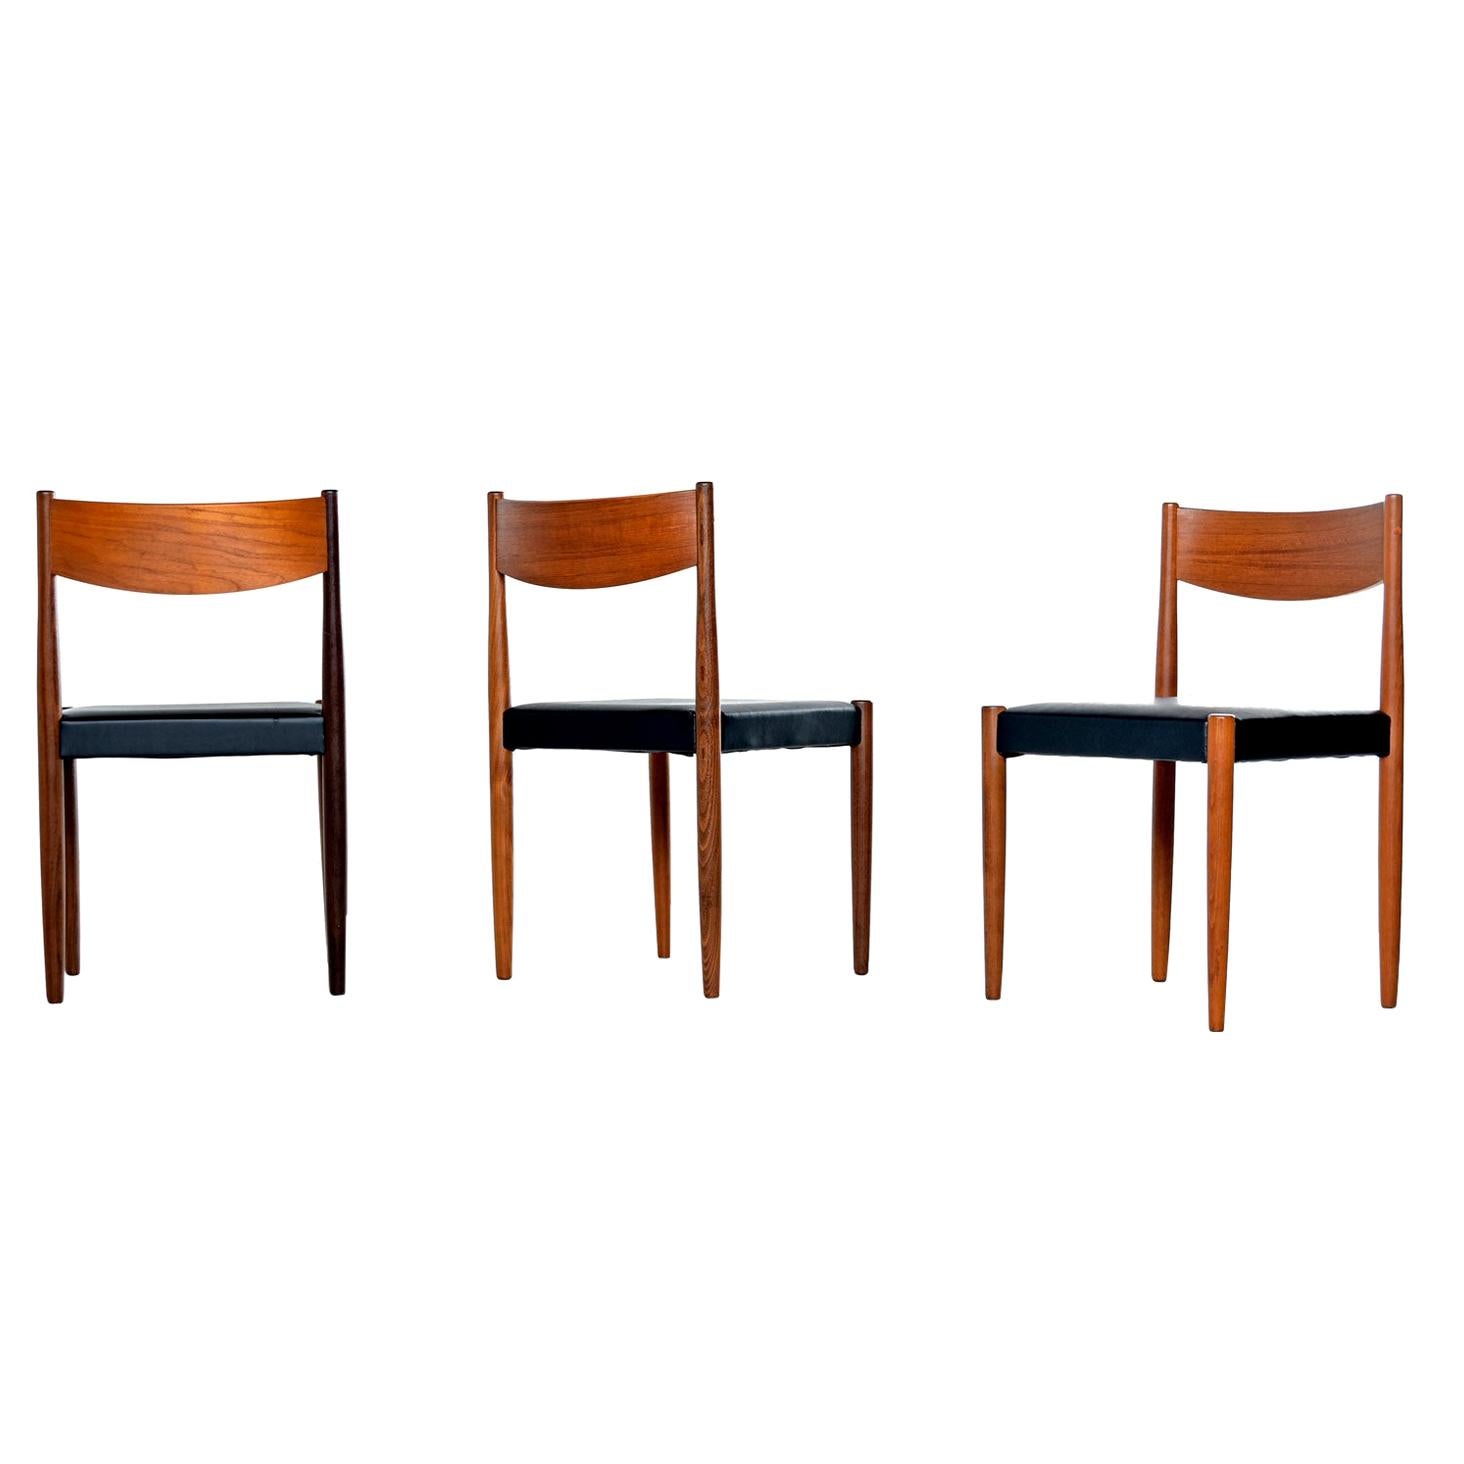 Fabulous group of six midcentury Danish modern teak and rosewood dining chairs. Graceful contouring in the teak backrest flows beautifully into the solid rosewood legs. Elegant minimalism and design at its best.

The restoration: The FMV team did